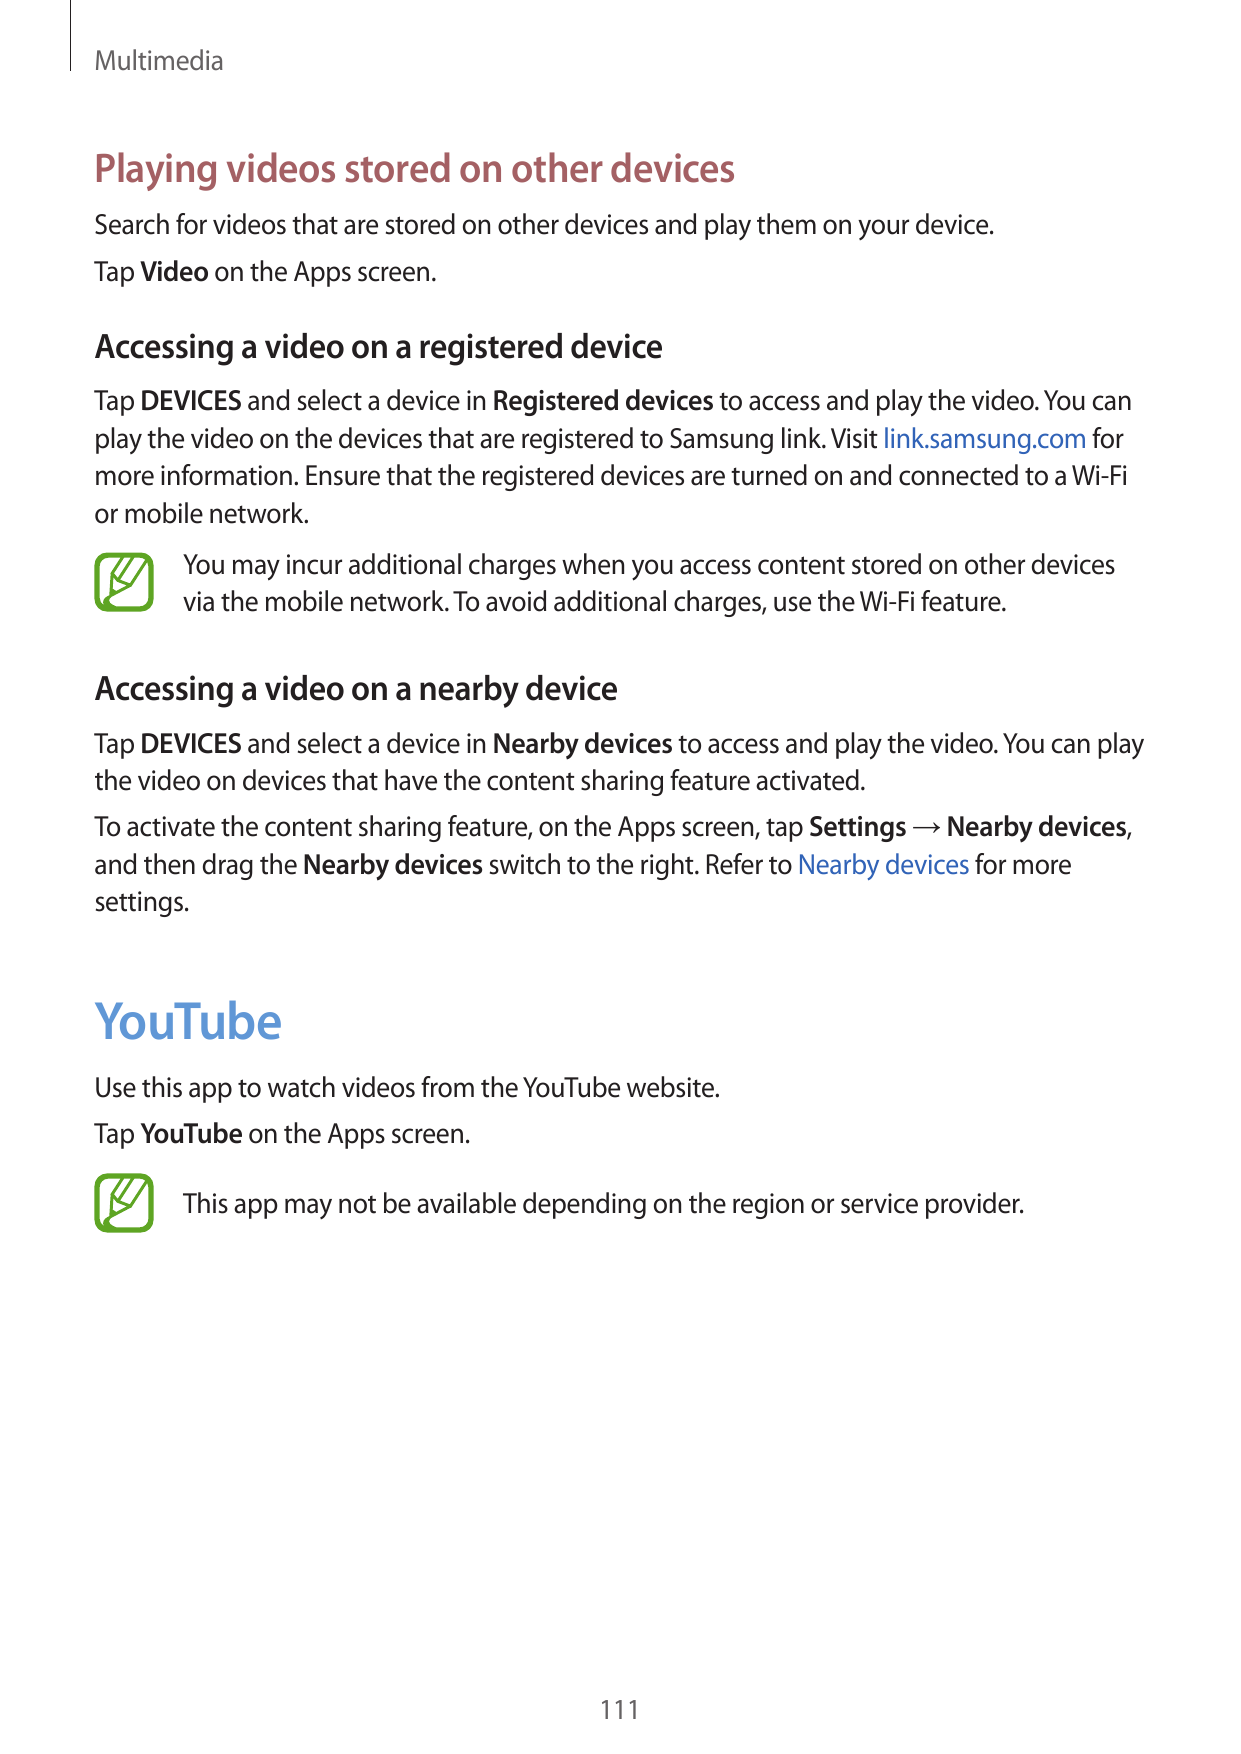 MultimediaPlaying videos stored on other devicesSearch for videos that are stored on other devices and play them on your device.